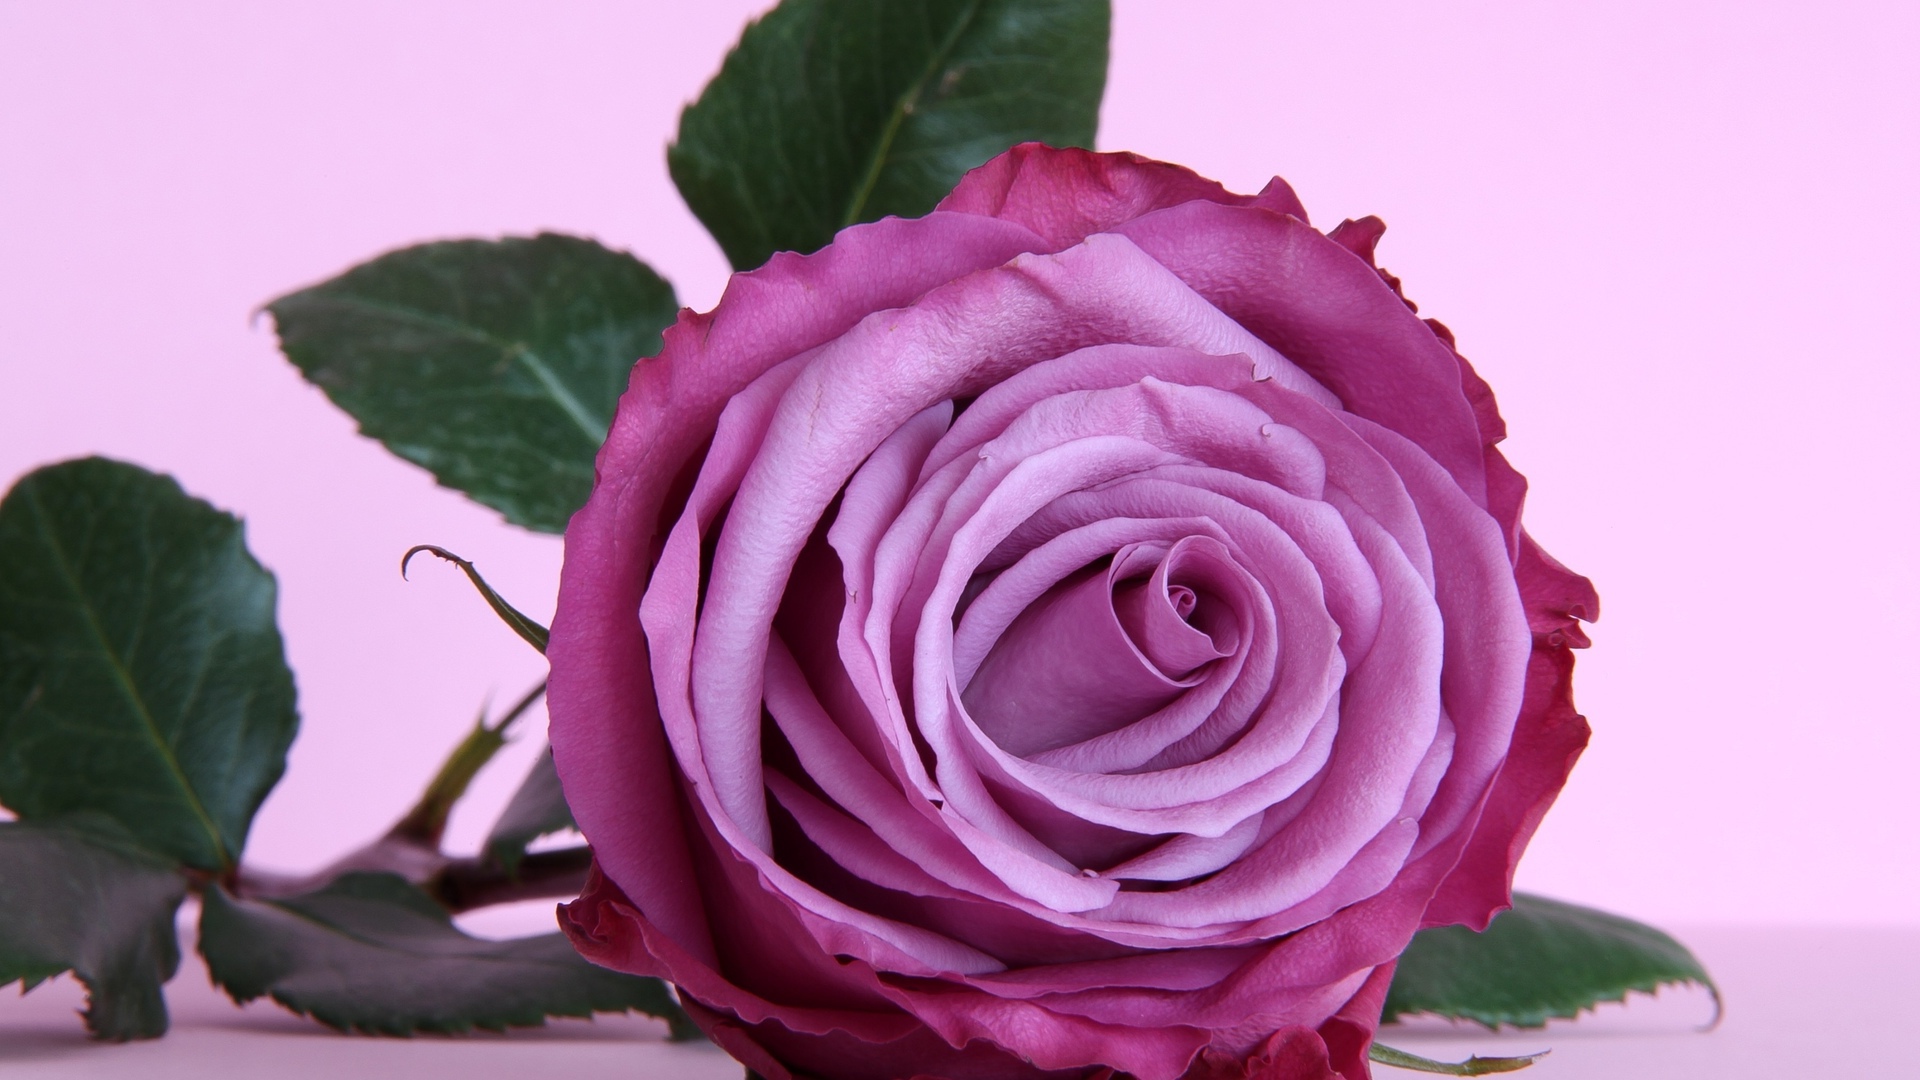 Beautiful purple rose on the table wallpapers and images   wallpapers